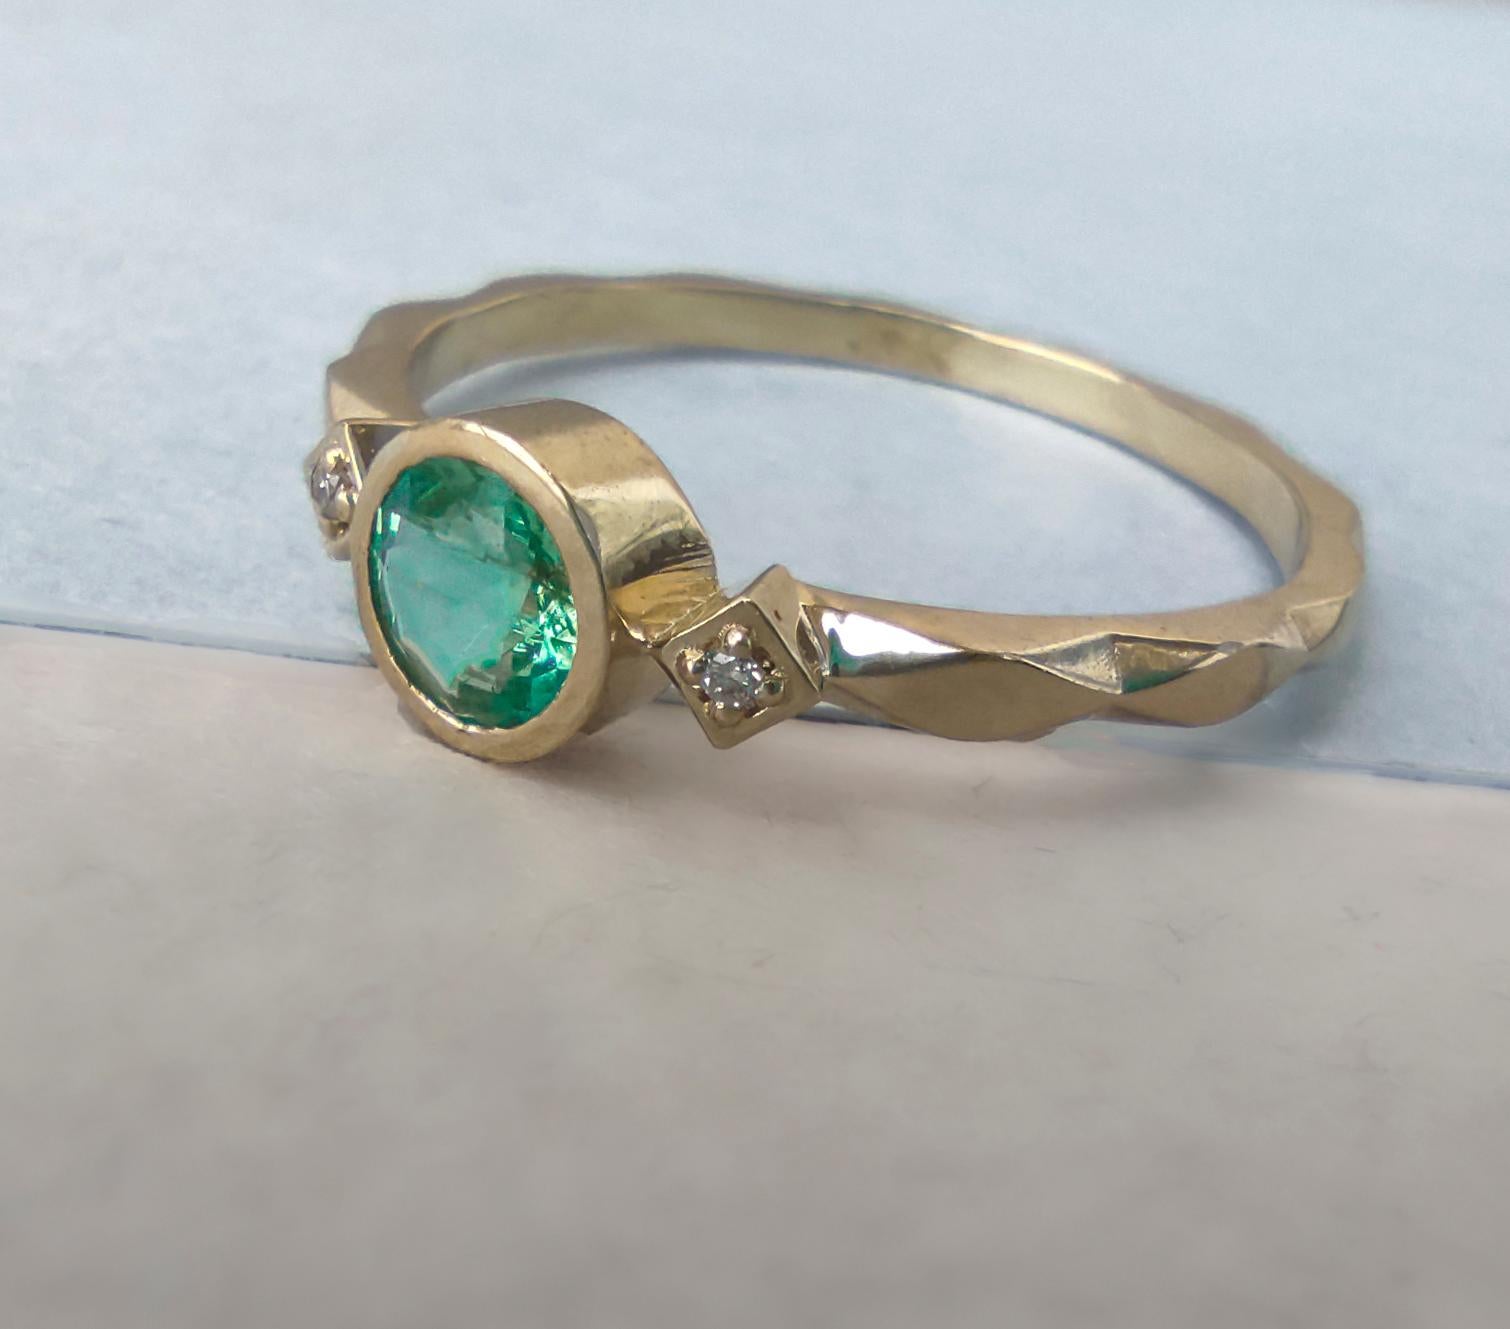 For Sale:  Round Emerald Ring in 14k Gold, Genuine Emerald Ring 2